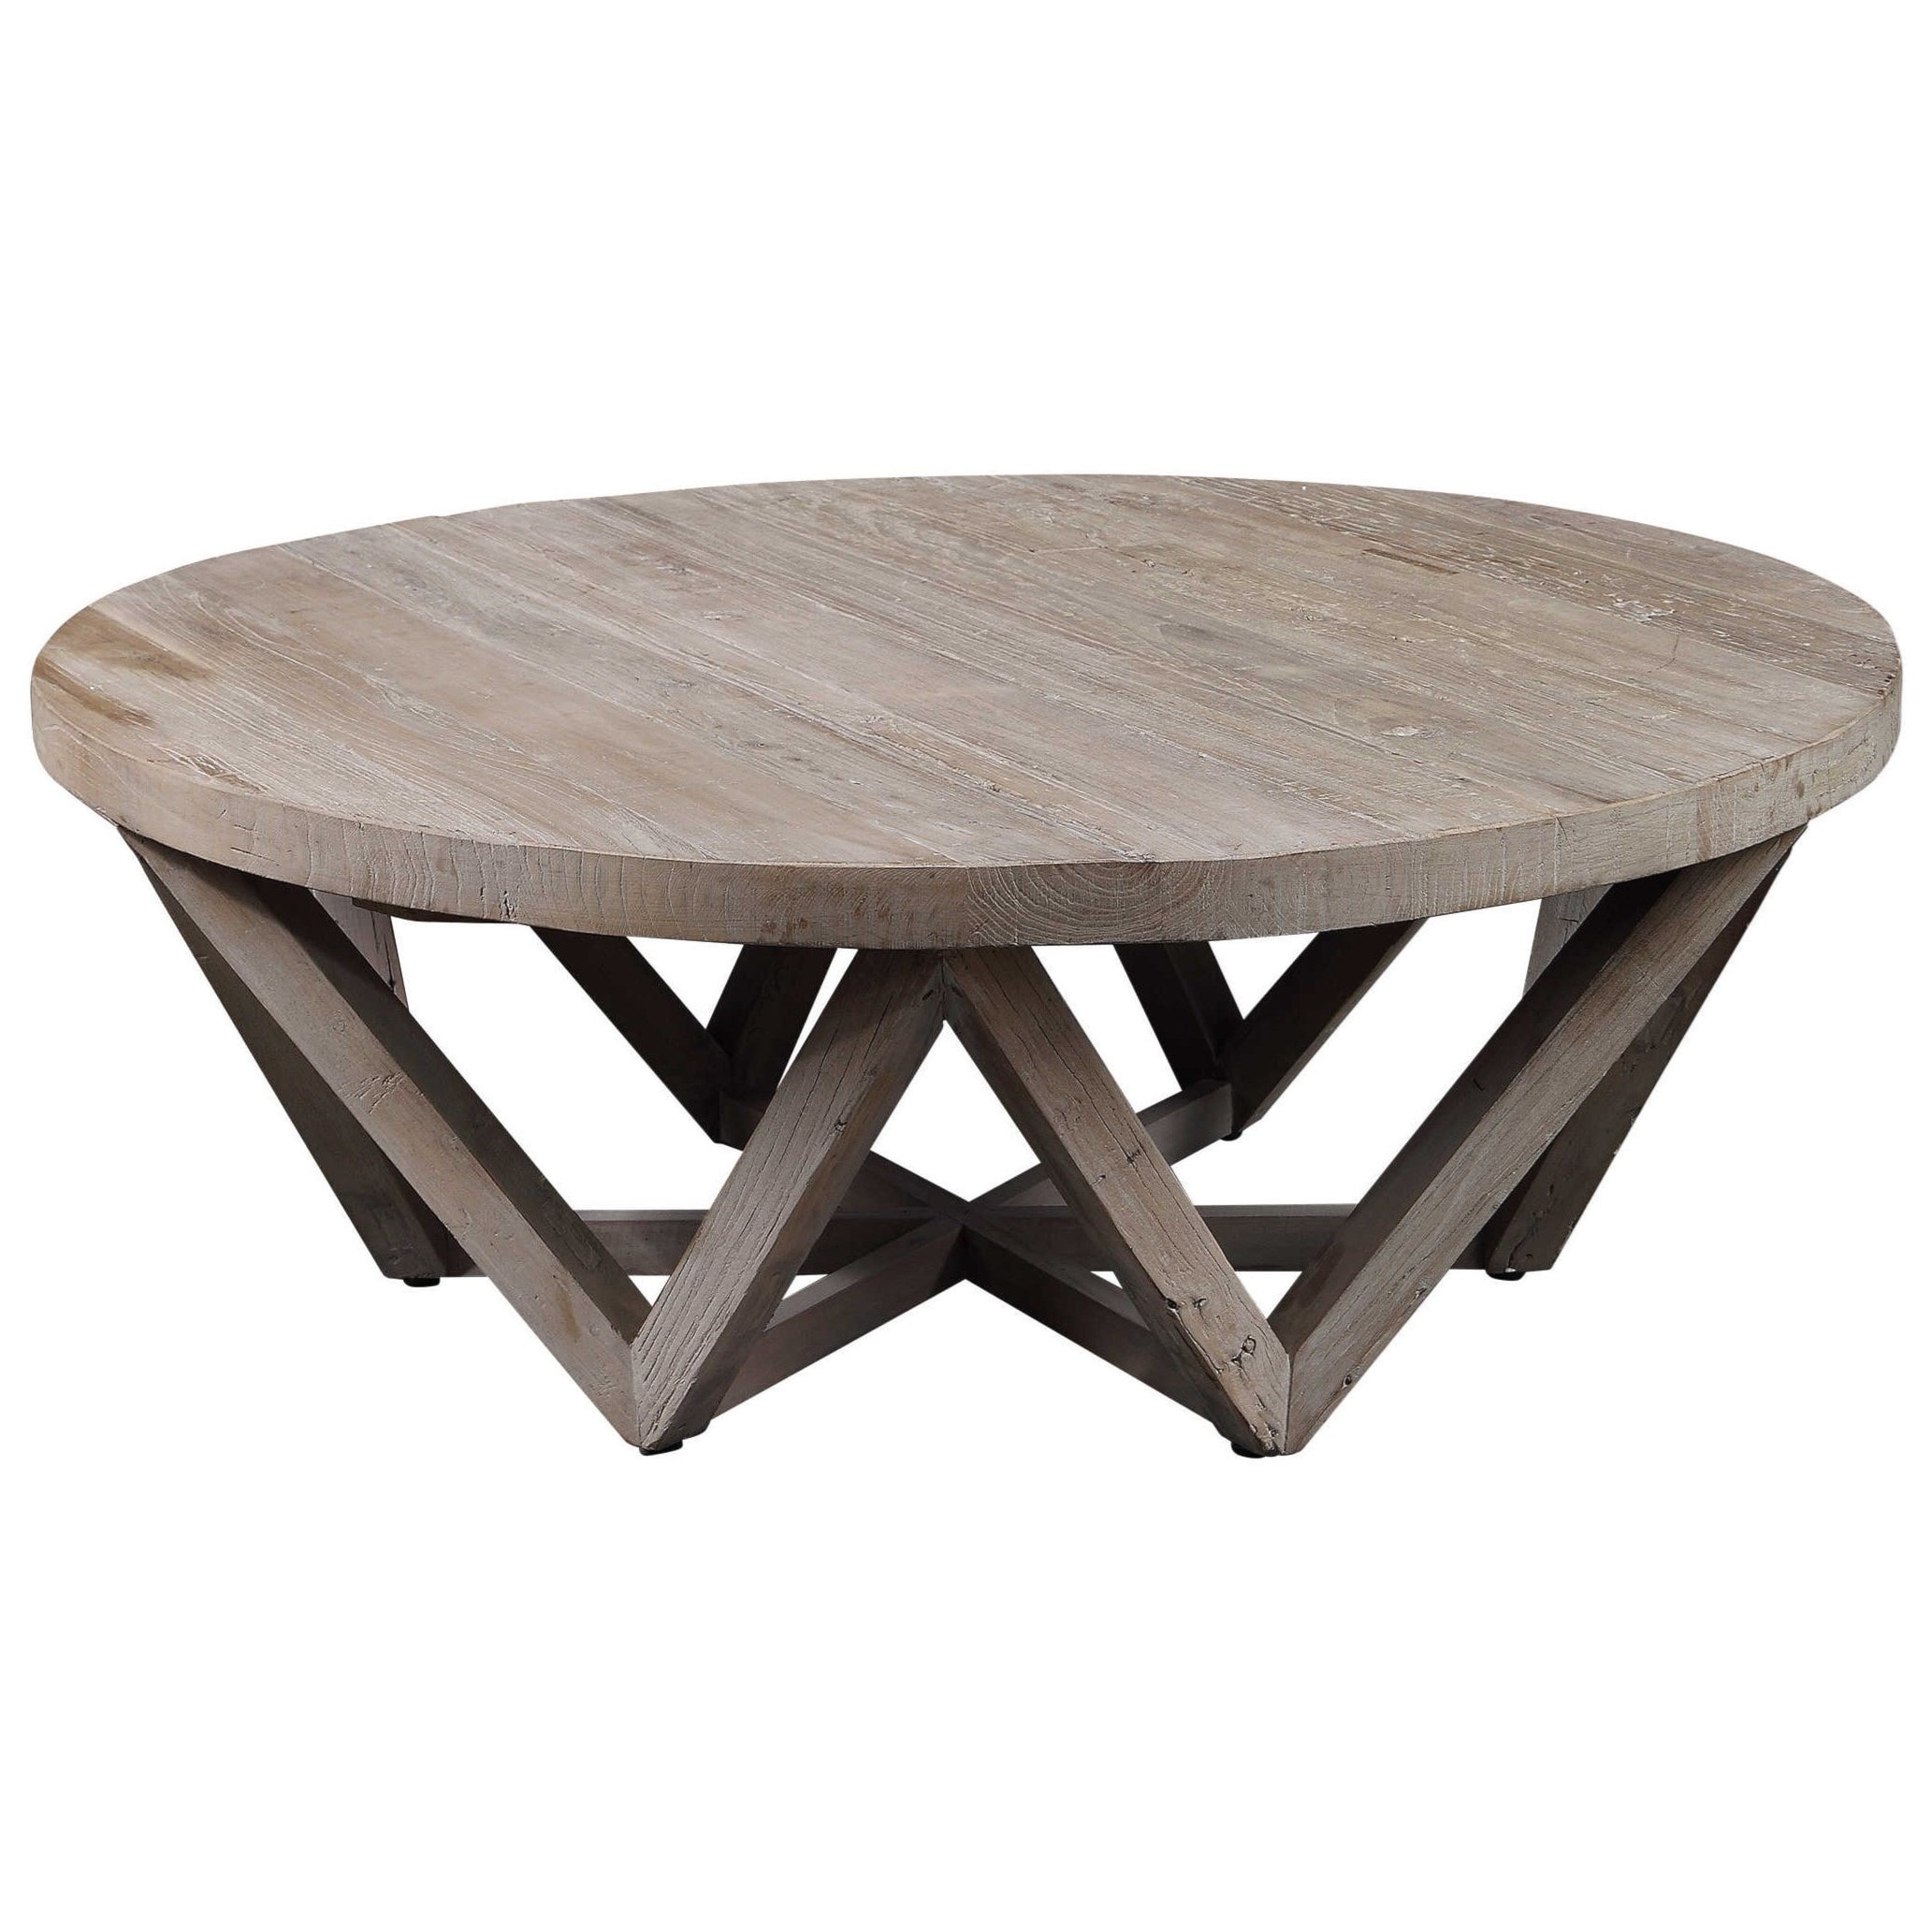 Uttermost Converge Round Coffee Table 25119 